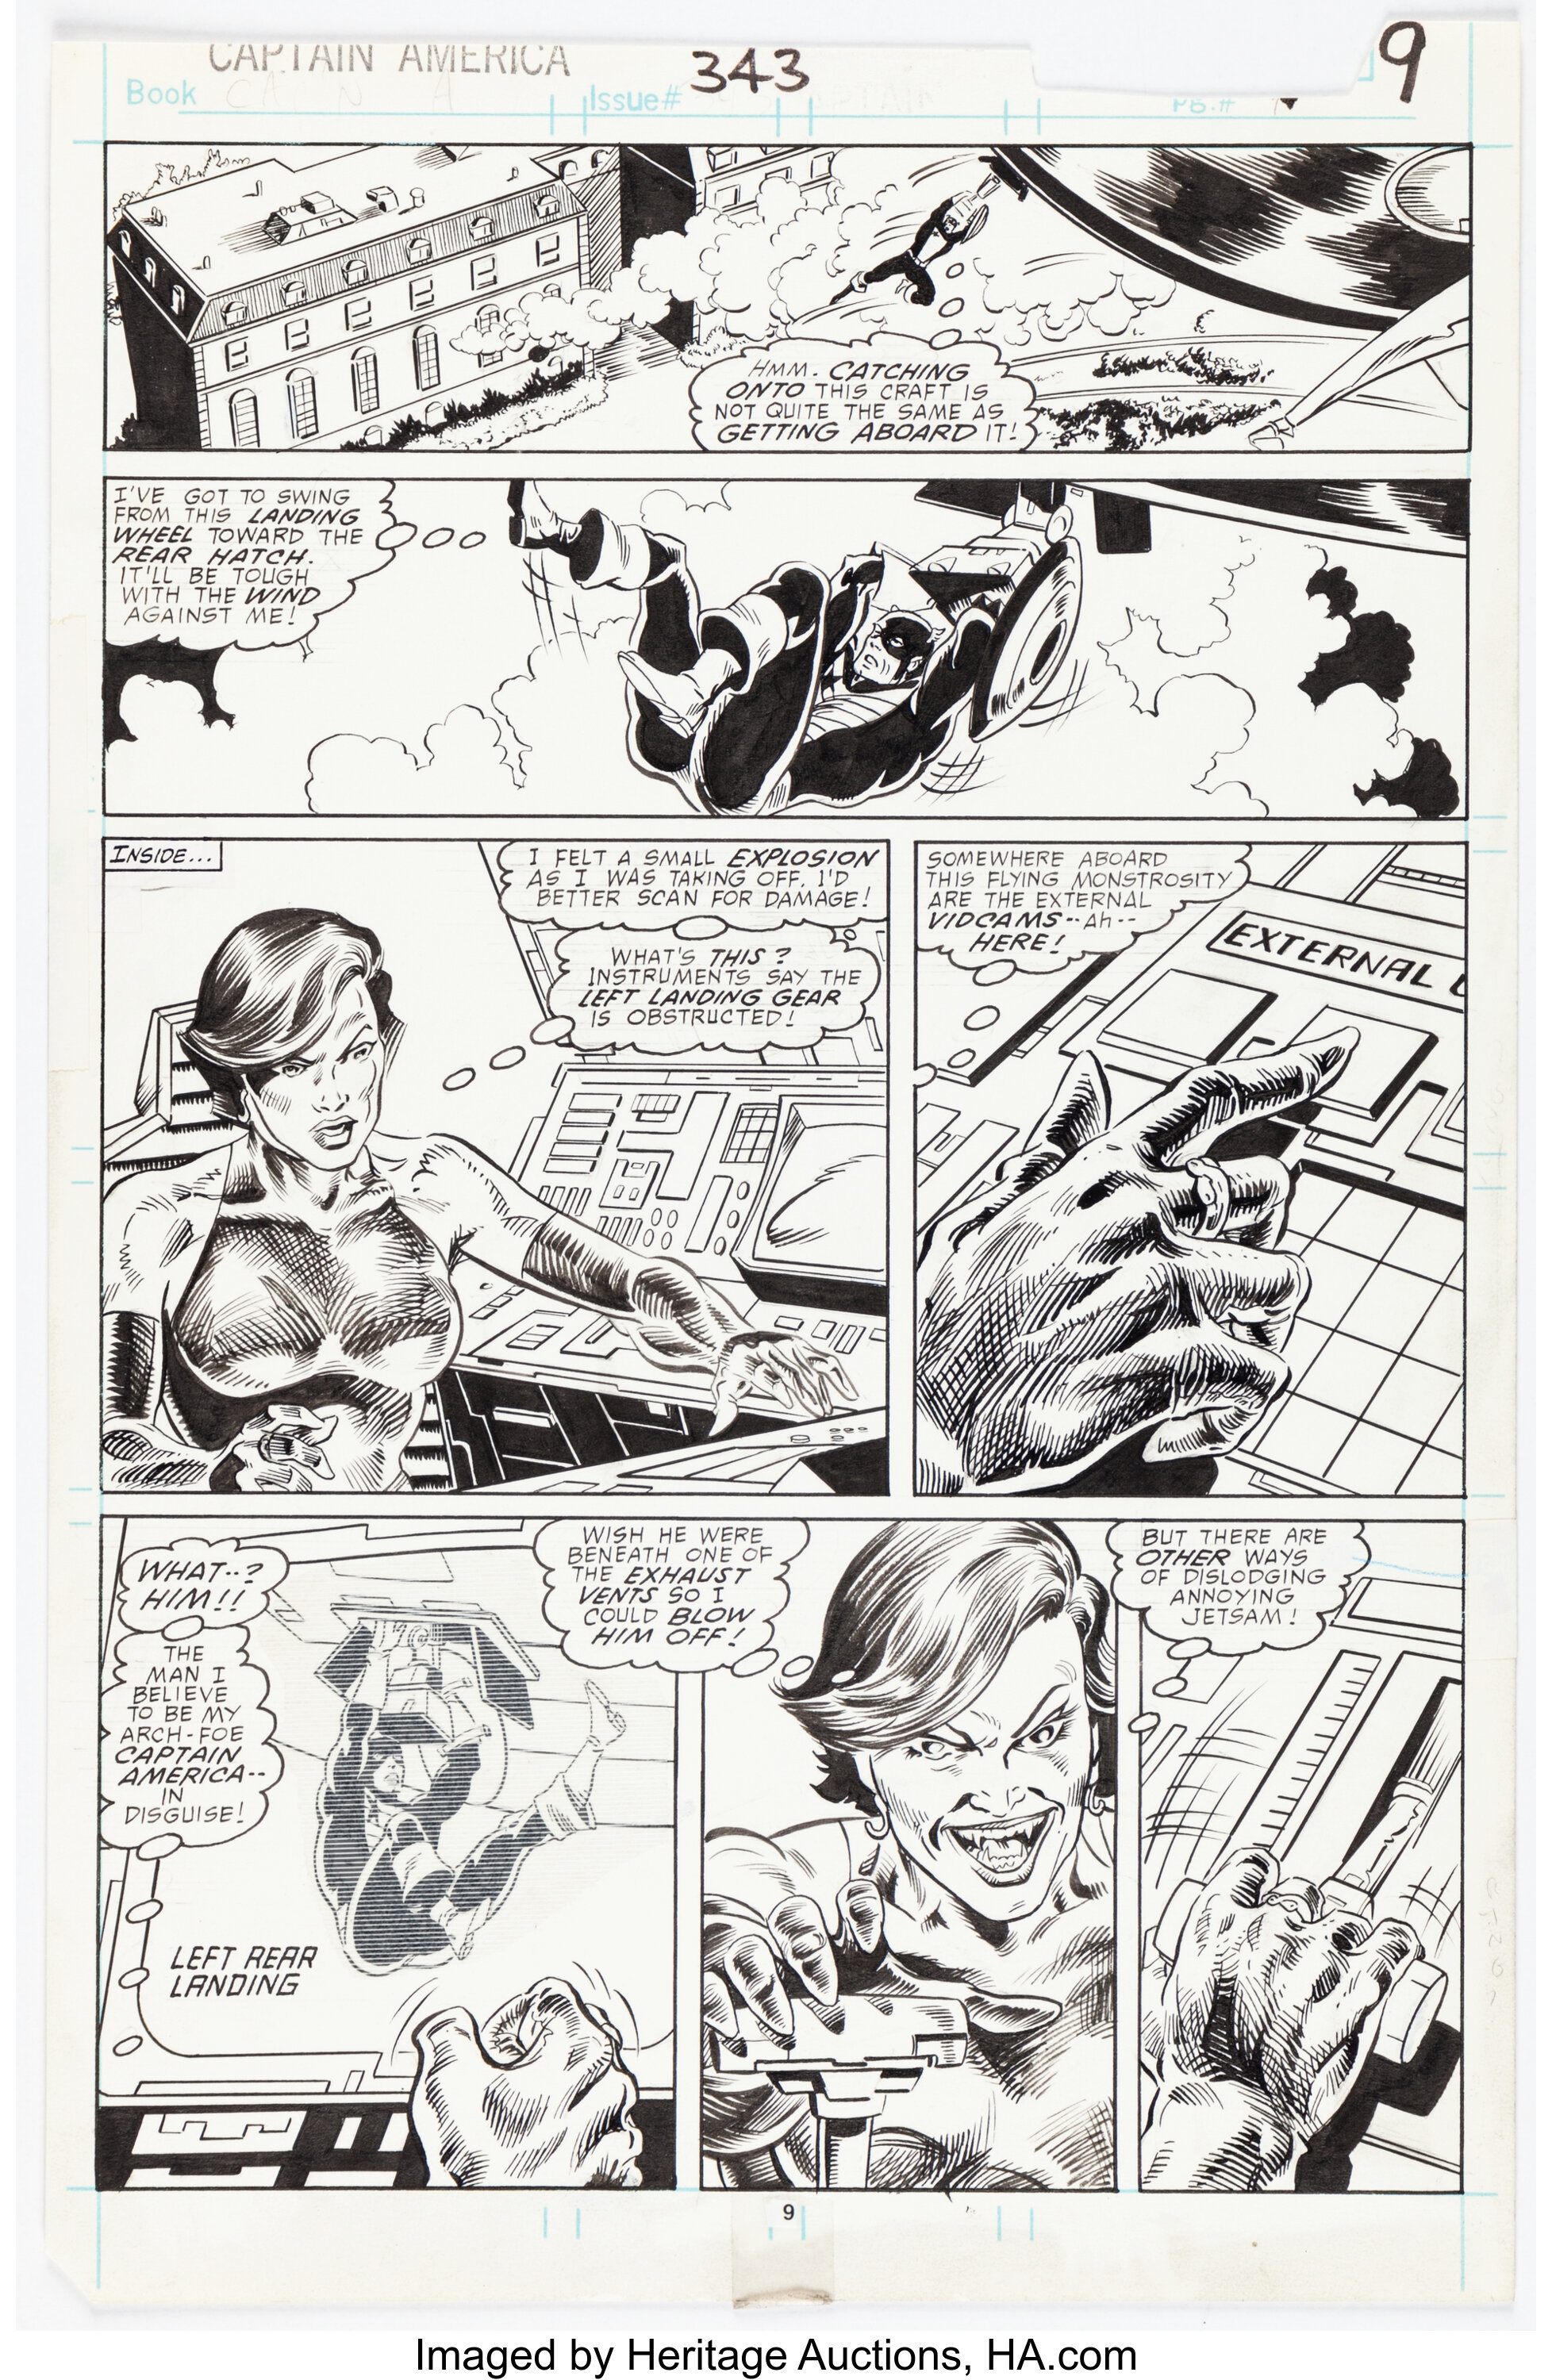 Kieron Dwyer And Al Milgrom Captain America 343 Story Page 7 Lot 49080 Heritage Auctions 7113